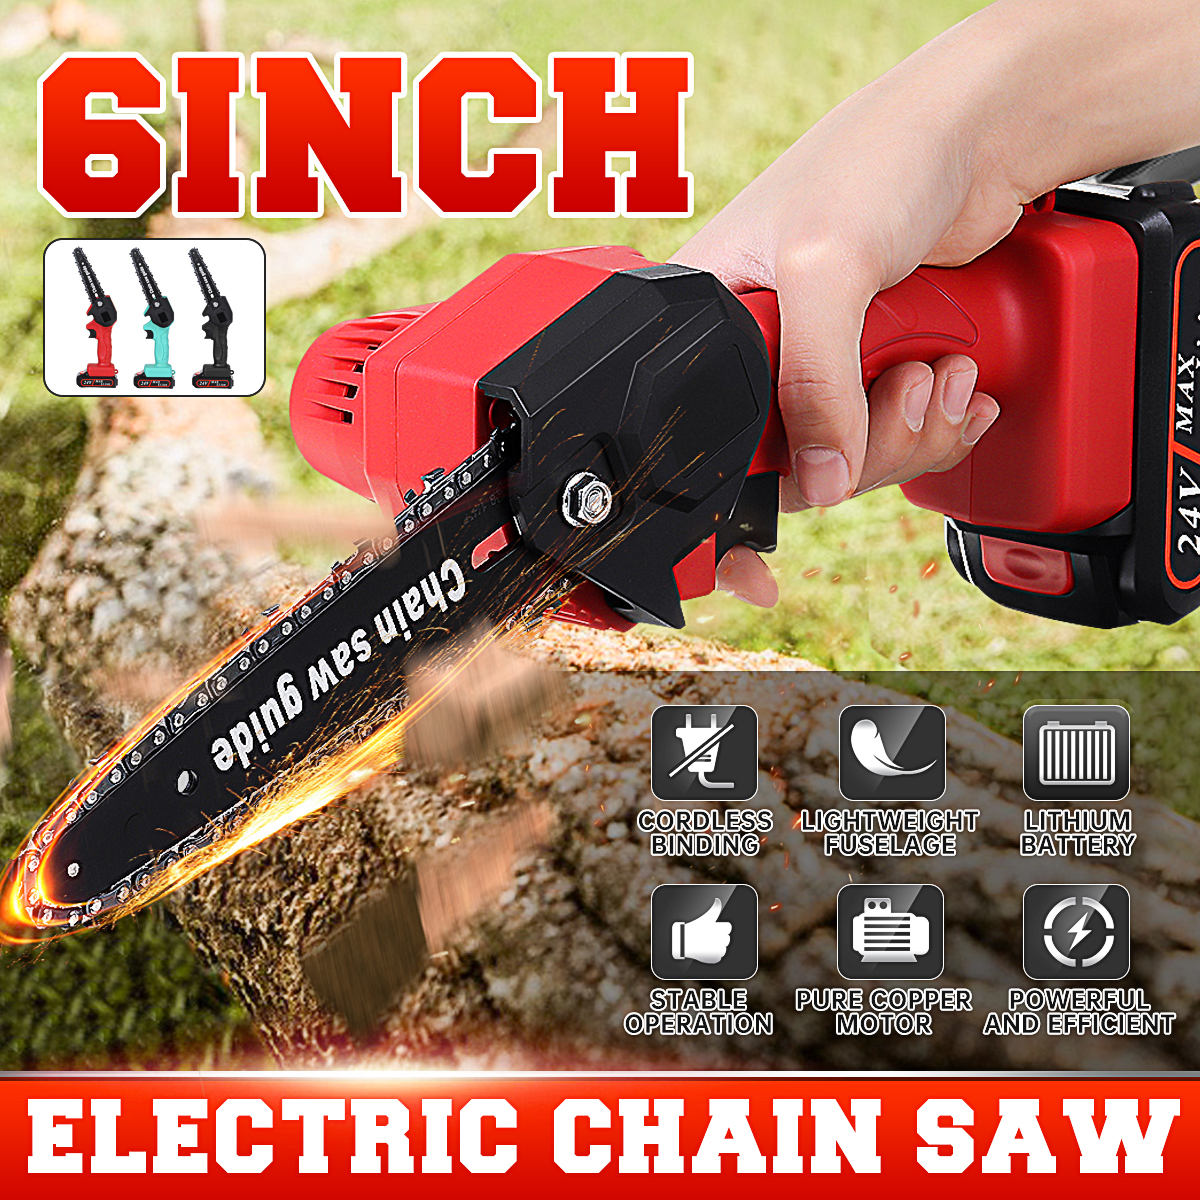 Doersupp-24V-6-Inch-Cordless-Electric-Chain-Saw-Wood-Cutter-550W-One-Hand-Saws-Woodworking-Machine-W-1797390-1